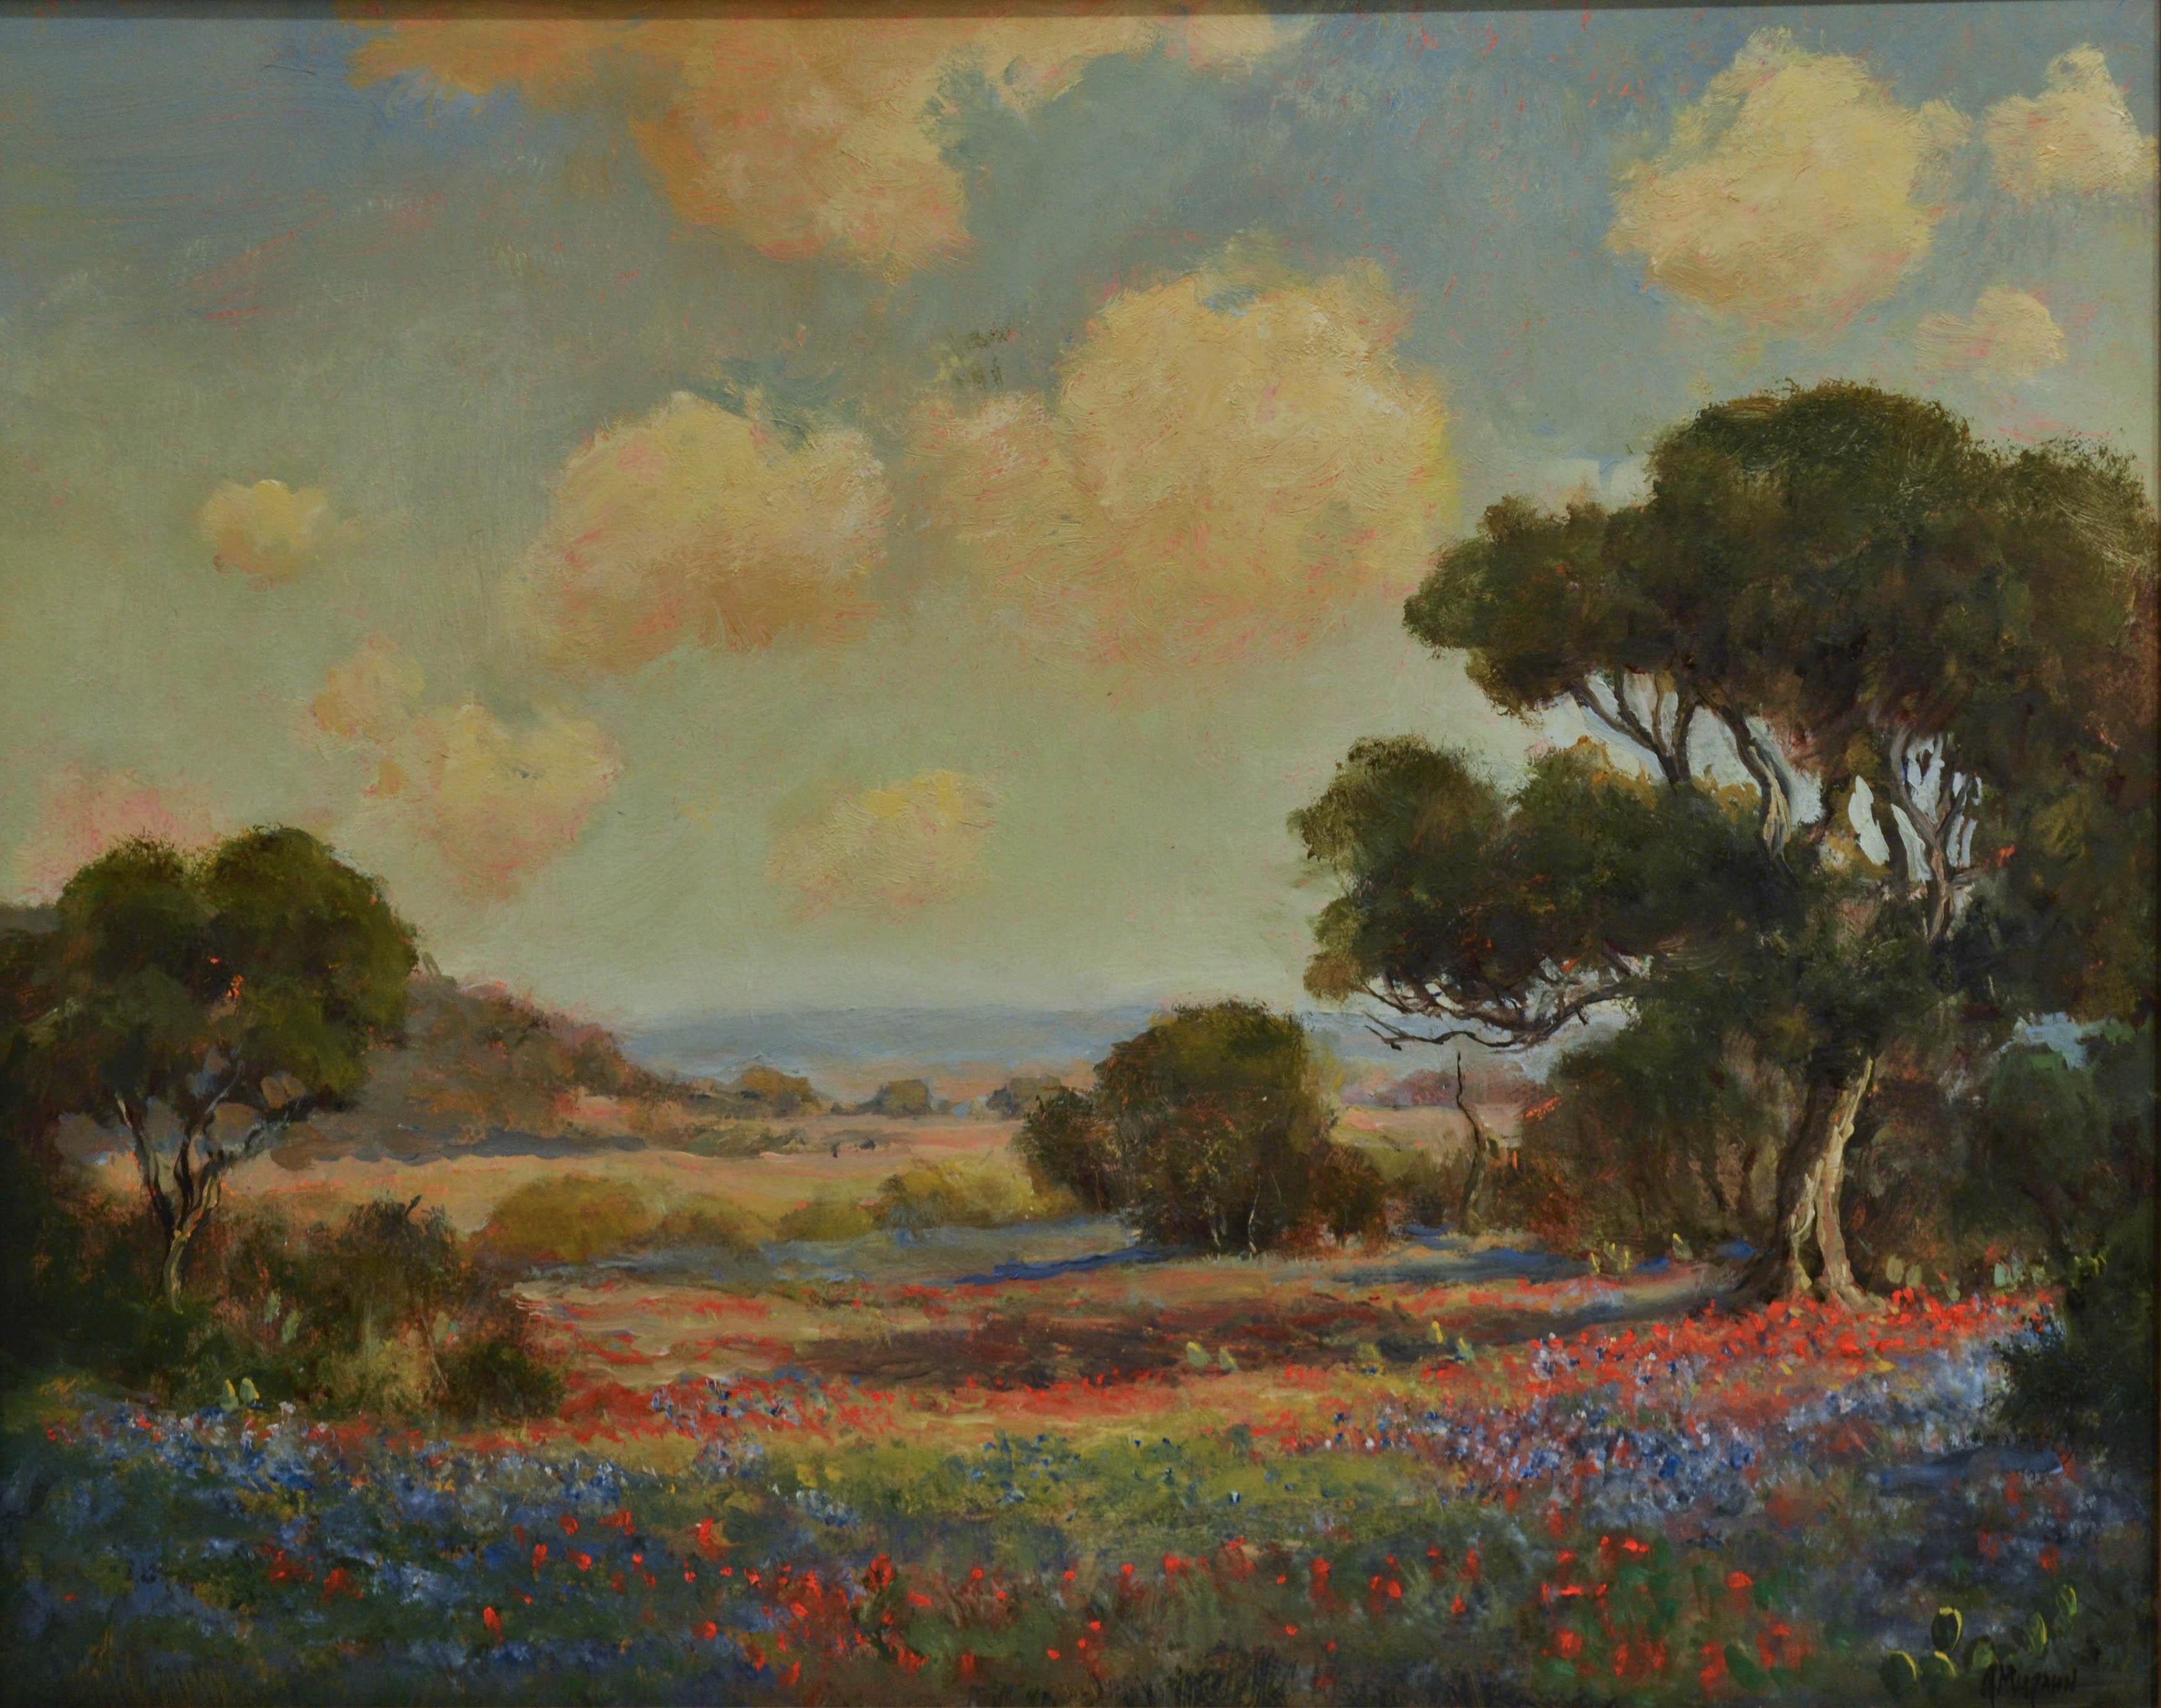 (Framed Size is 23 x 27 inches) - Oil on Wood Panel

Jerry Malzahn, a talented landscape artist, was born in Stuttgart Arkansas on September 30, 1946, moving to Texas as young adult. He earned a Bachelor of Arts degree from the University of North